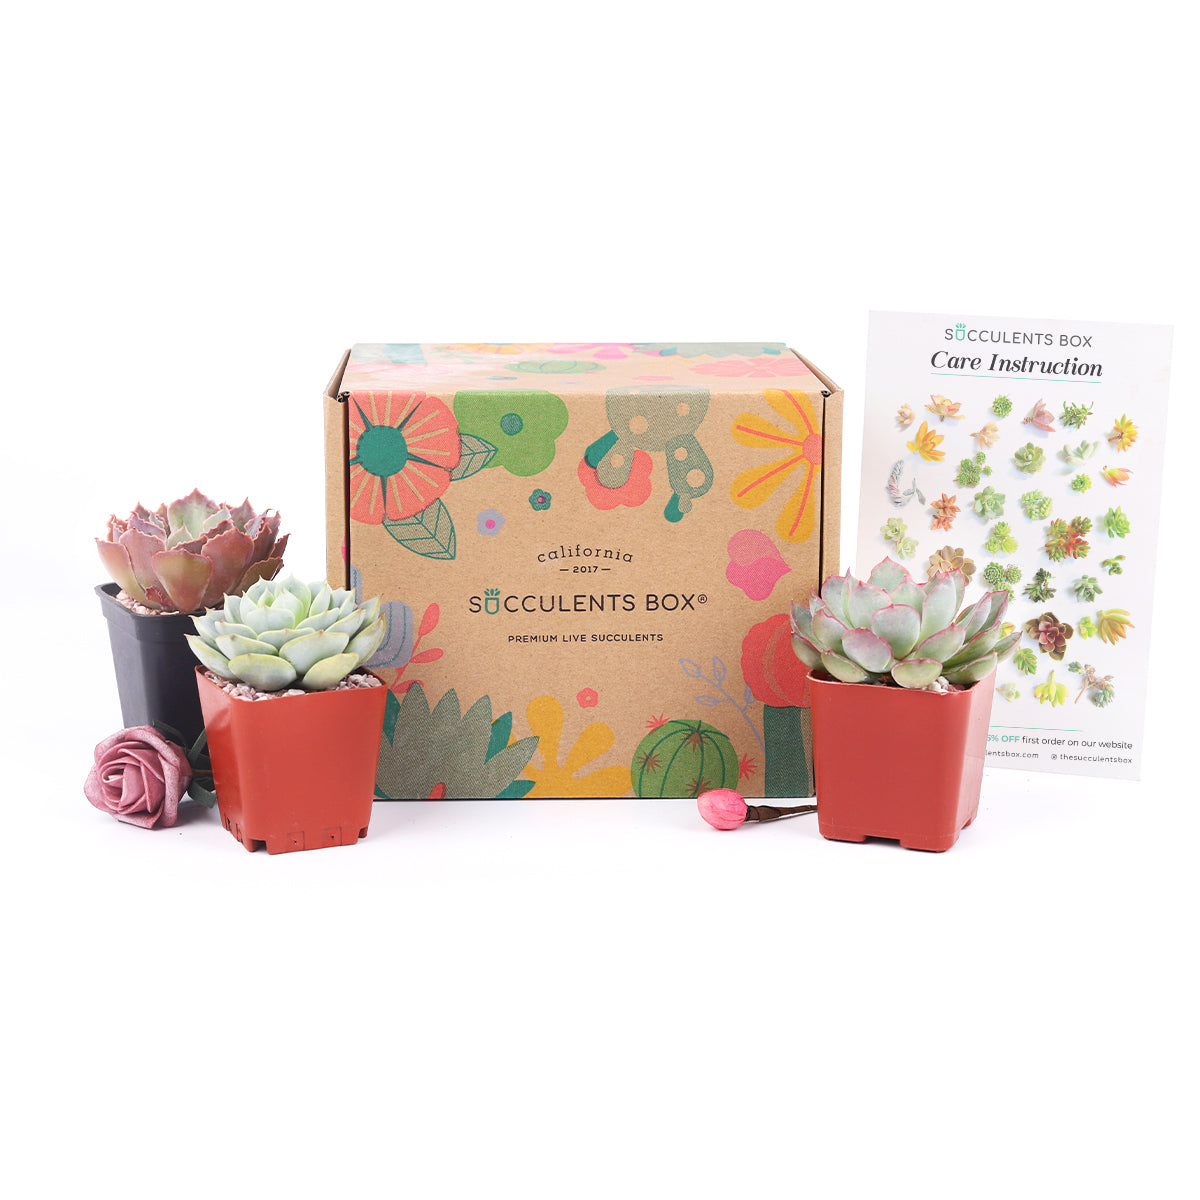 subscription gift box, subscription box gift ideas for mom, Succulents Box Monthly, Succulents for Sale, Succulents Box with Care Guide, personalized mother's day gifts, mother day gifts, Succulent Gift Boxes, Succulent Subcription Boxes for sale, Succulents for Sale